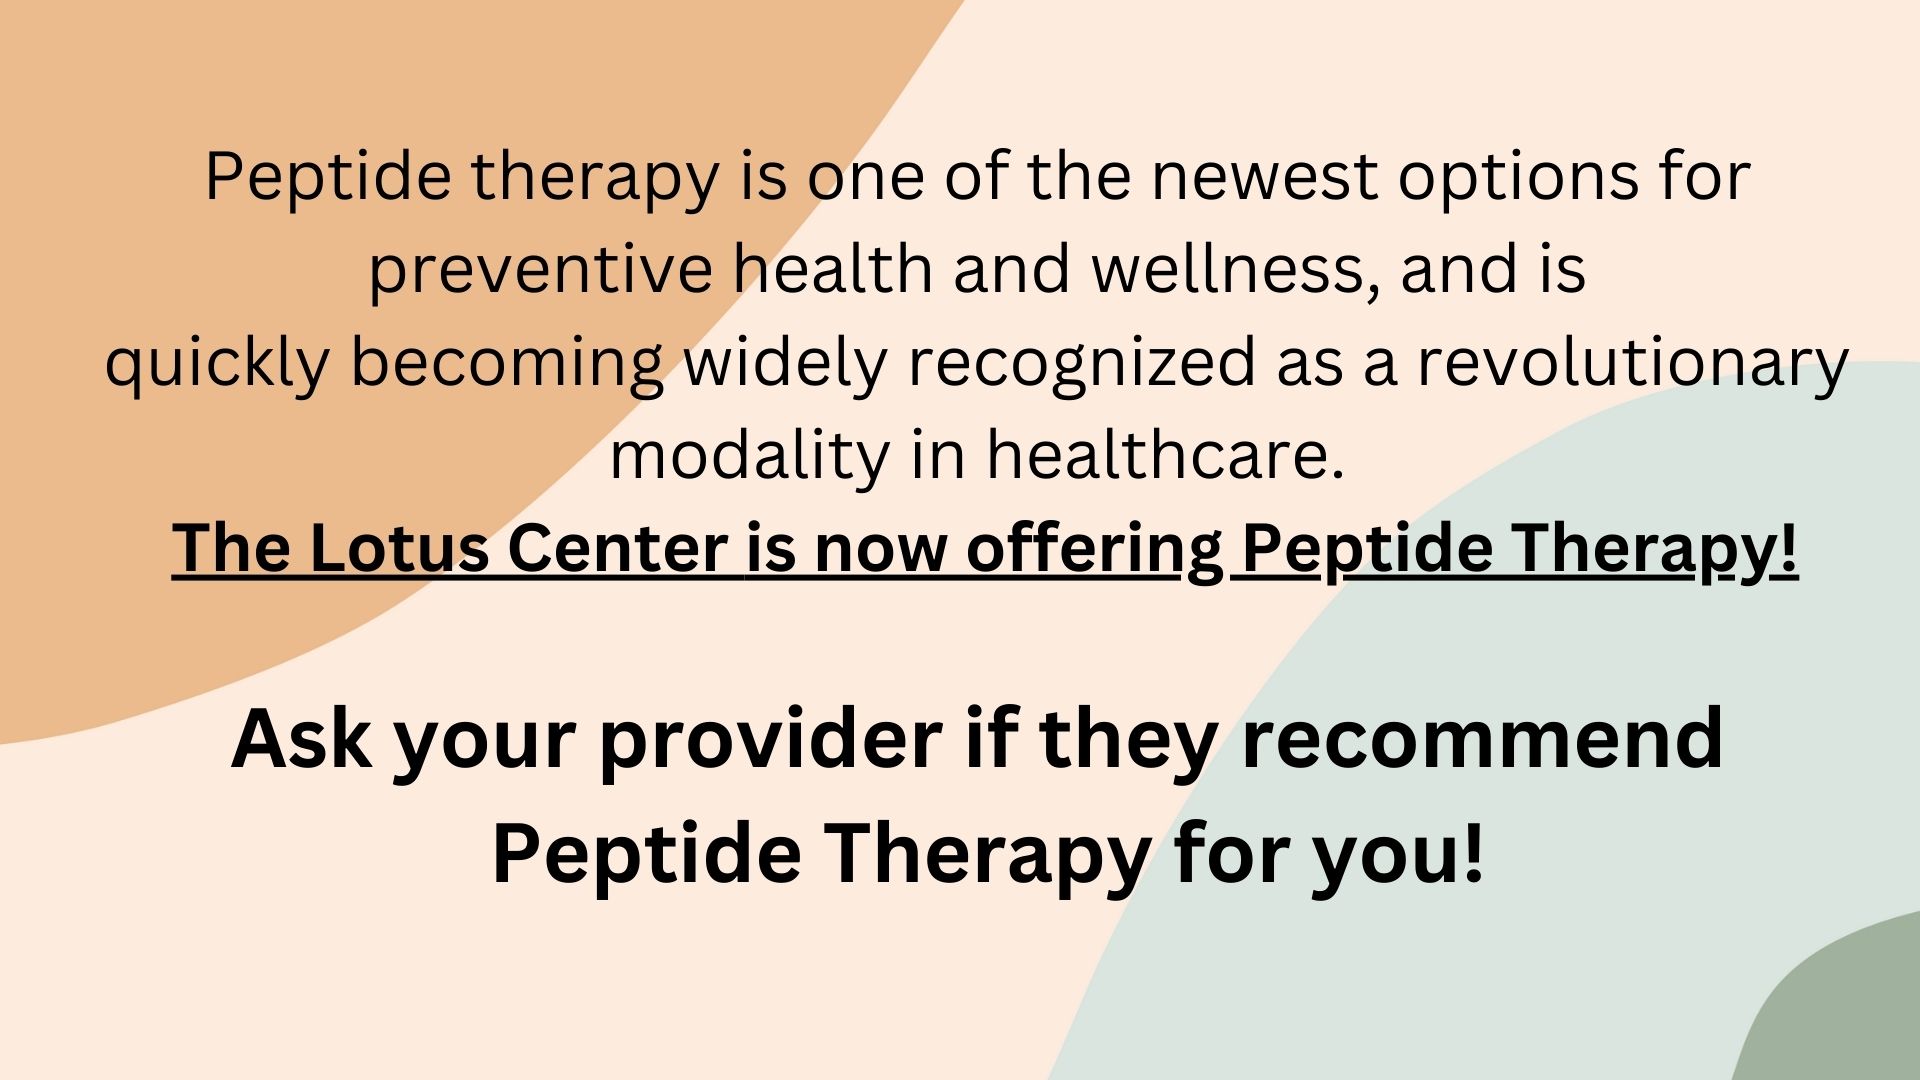 Peptide therapy